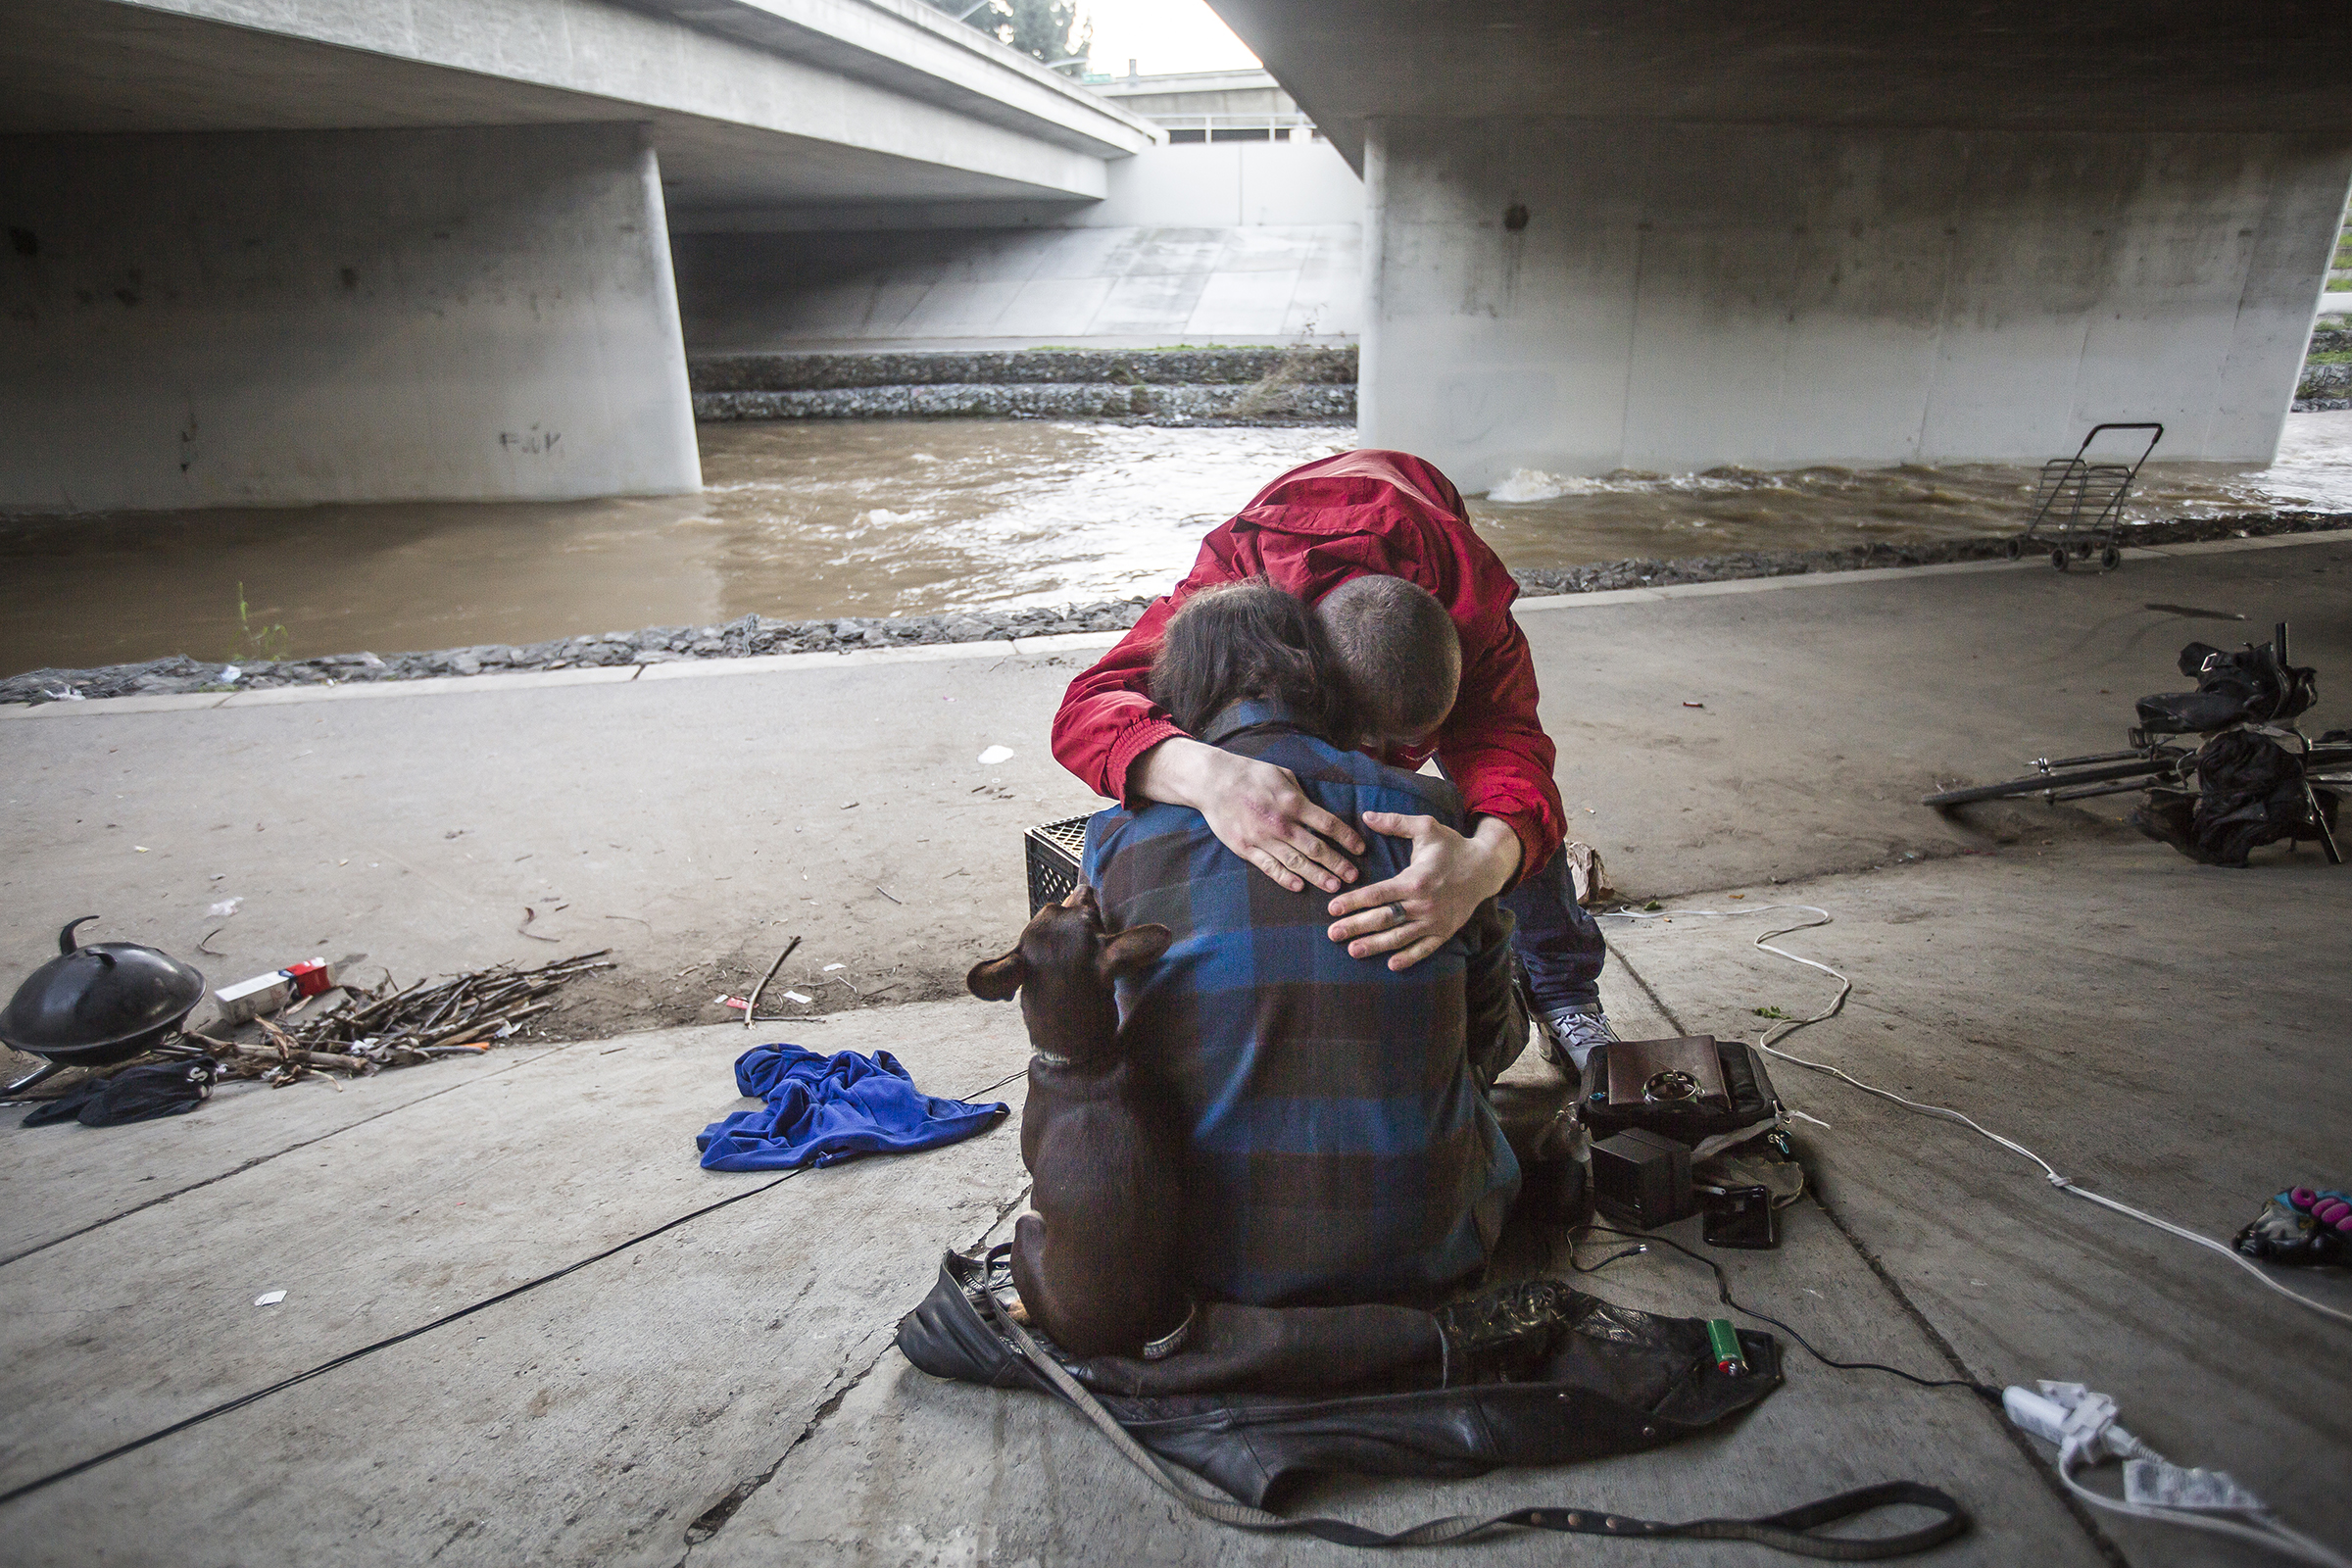  A homeless boy and dog give affection to a friend having a hard time under the Guadalupe overpass in Downtown San Jose, California.  